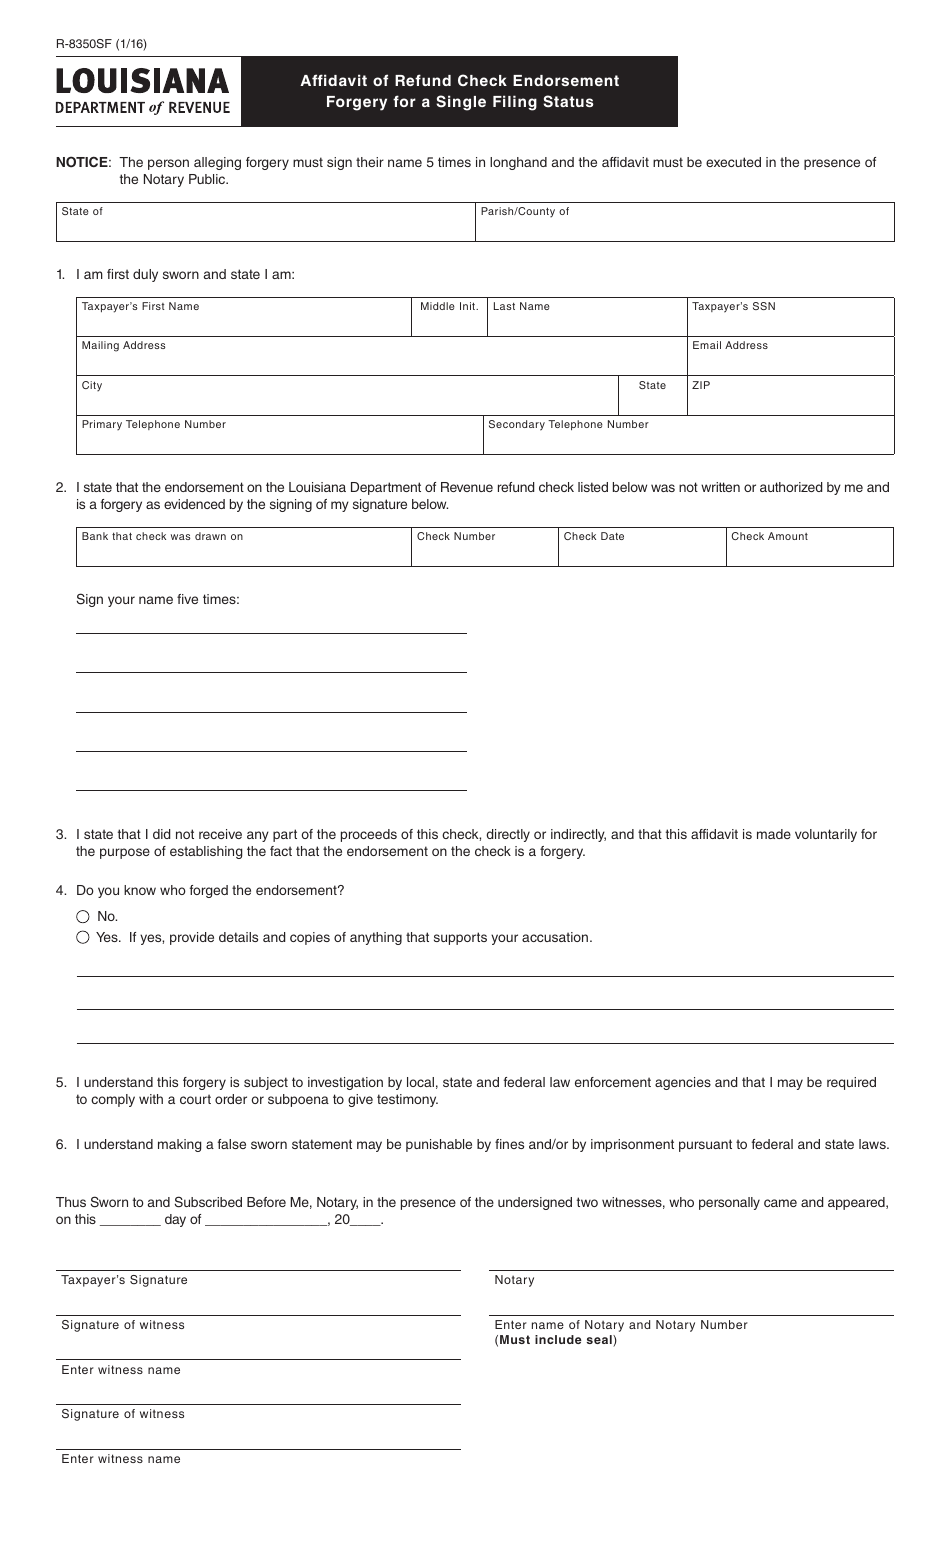 Form R-8350SF Affidavit of Refund Check Endorsement Forgery for a Single Filing Status - Louisiana, Page 1